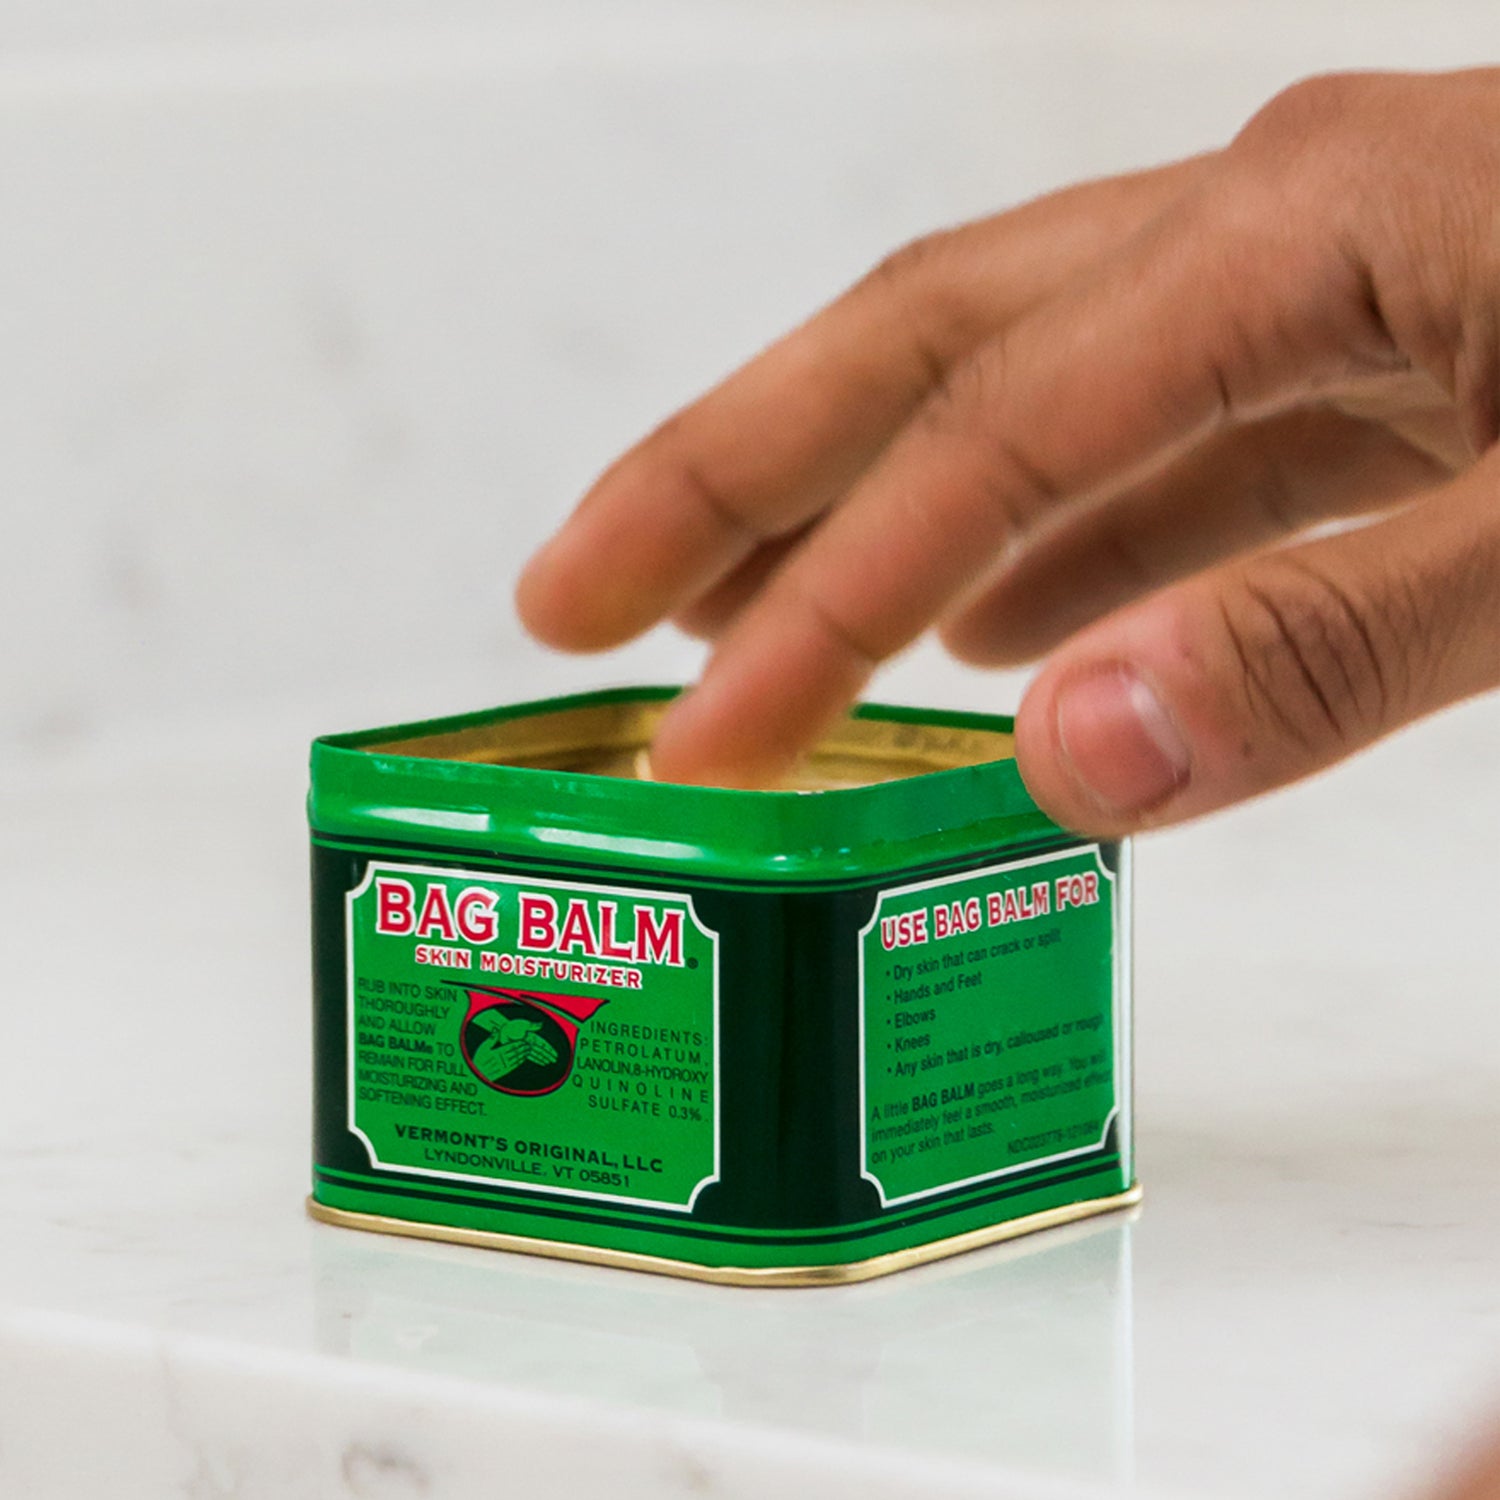 The Top 10 Ways Our Fans Are Using Bag Balm